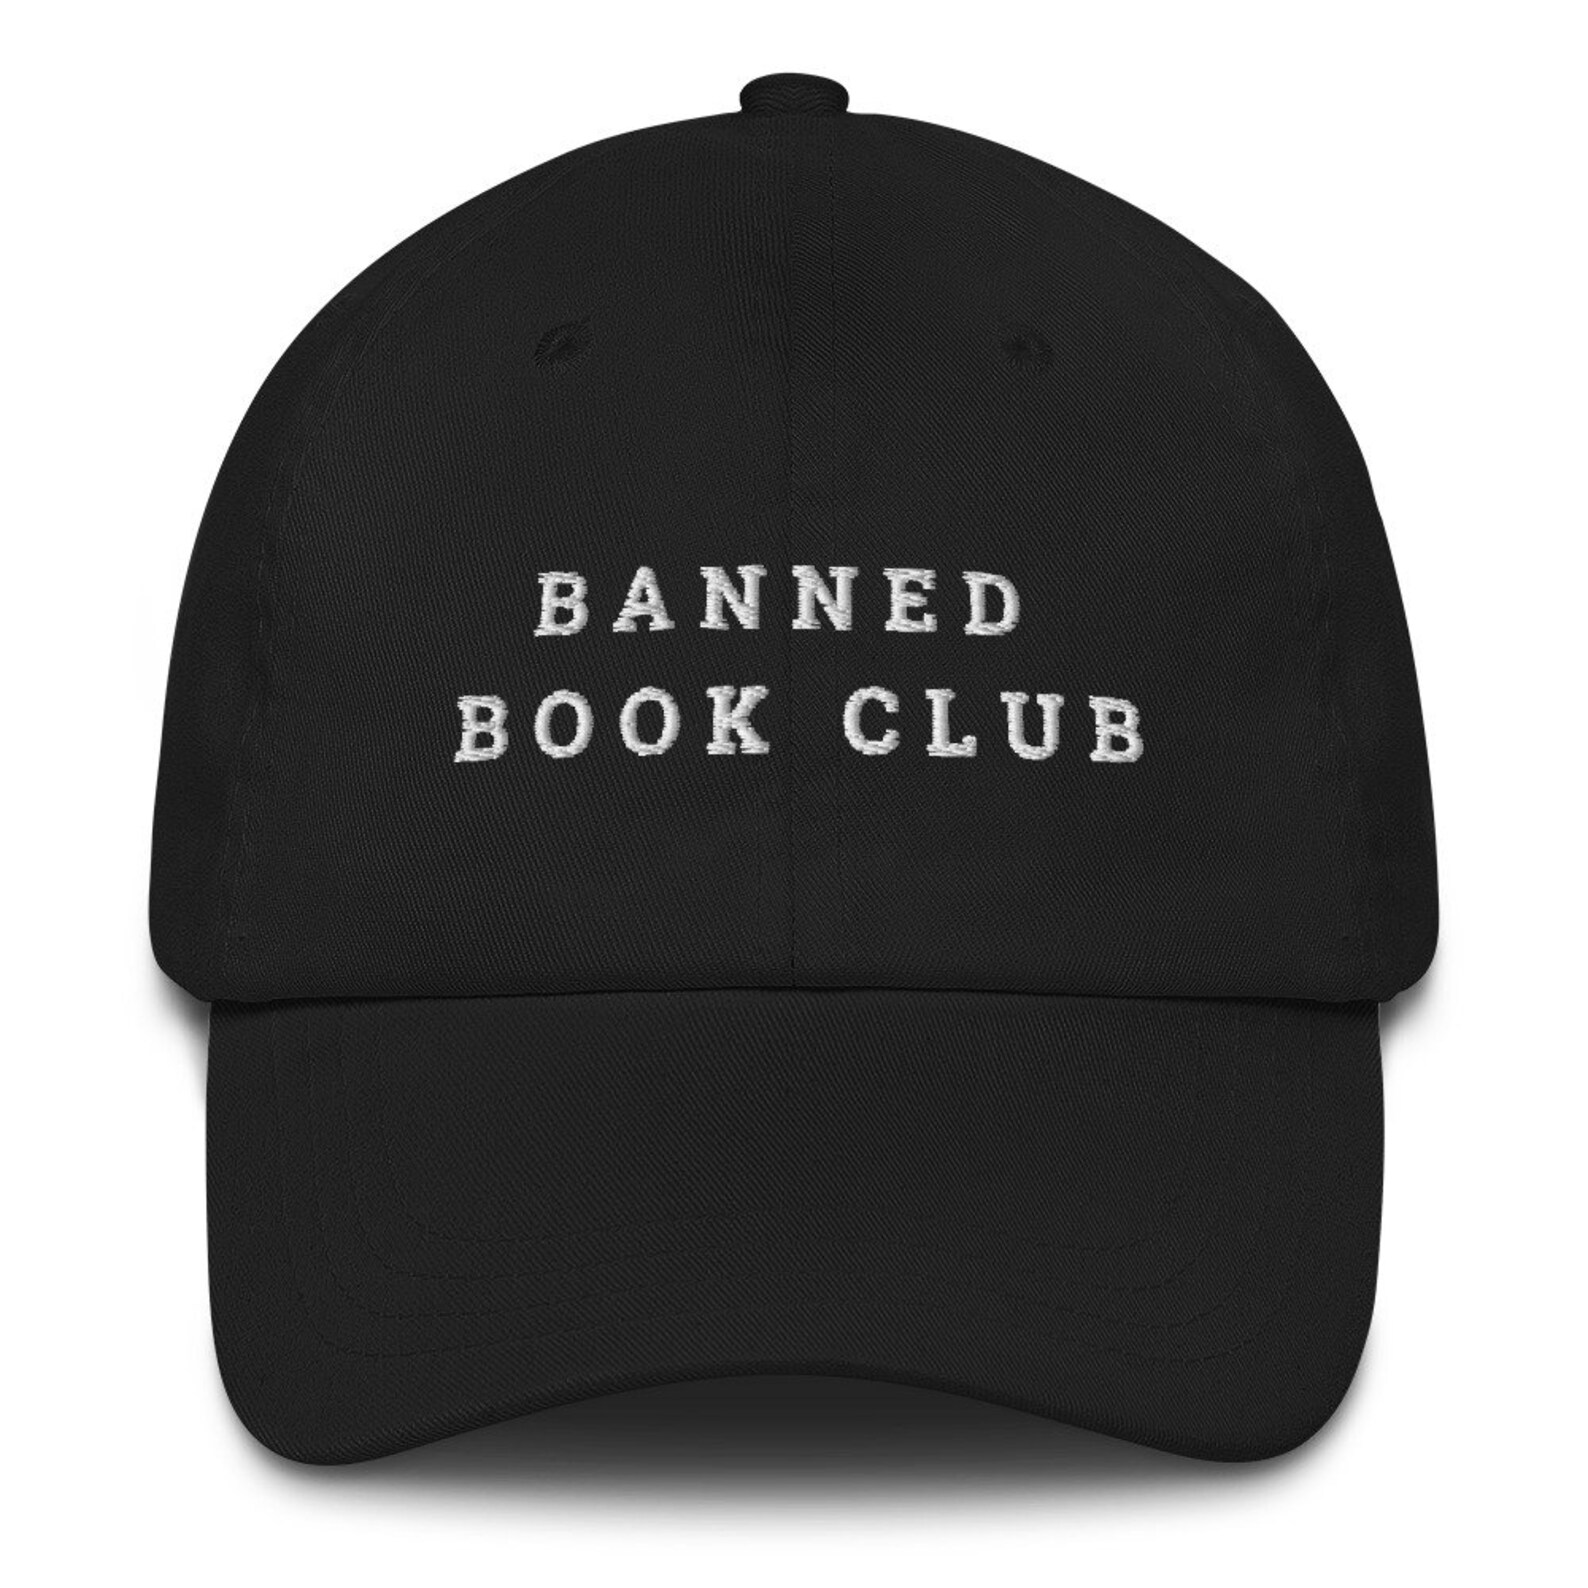 a photo of a black dad hat with "Banned Book Club" on the front in white